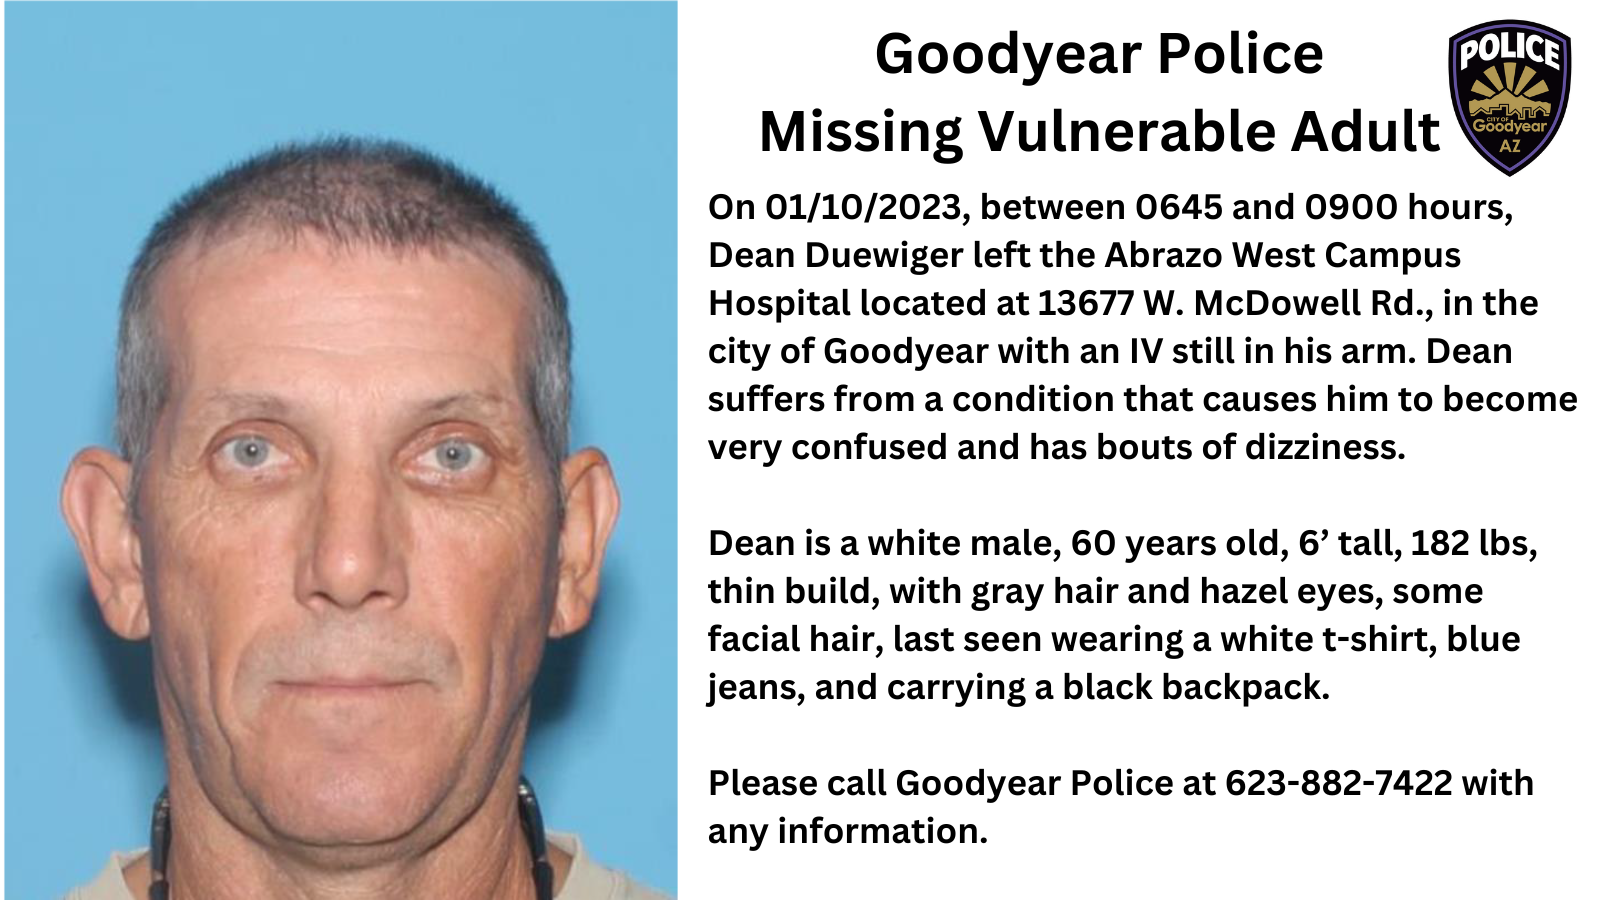 Update Found Safegoodyear Police Missing Vulnerable Adult Alert Goodyear Police Department 4971